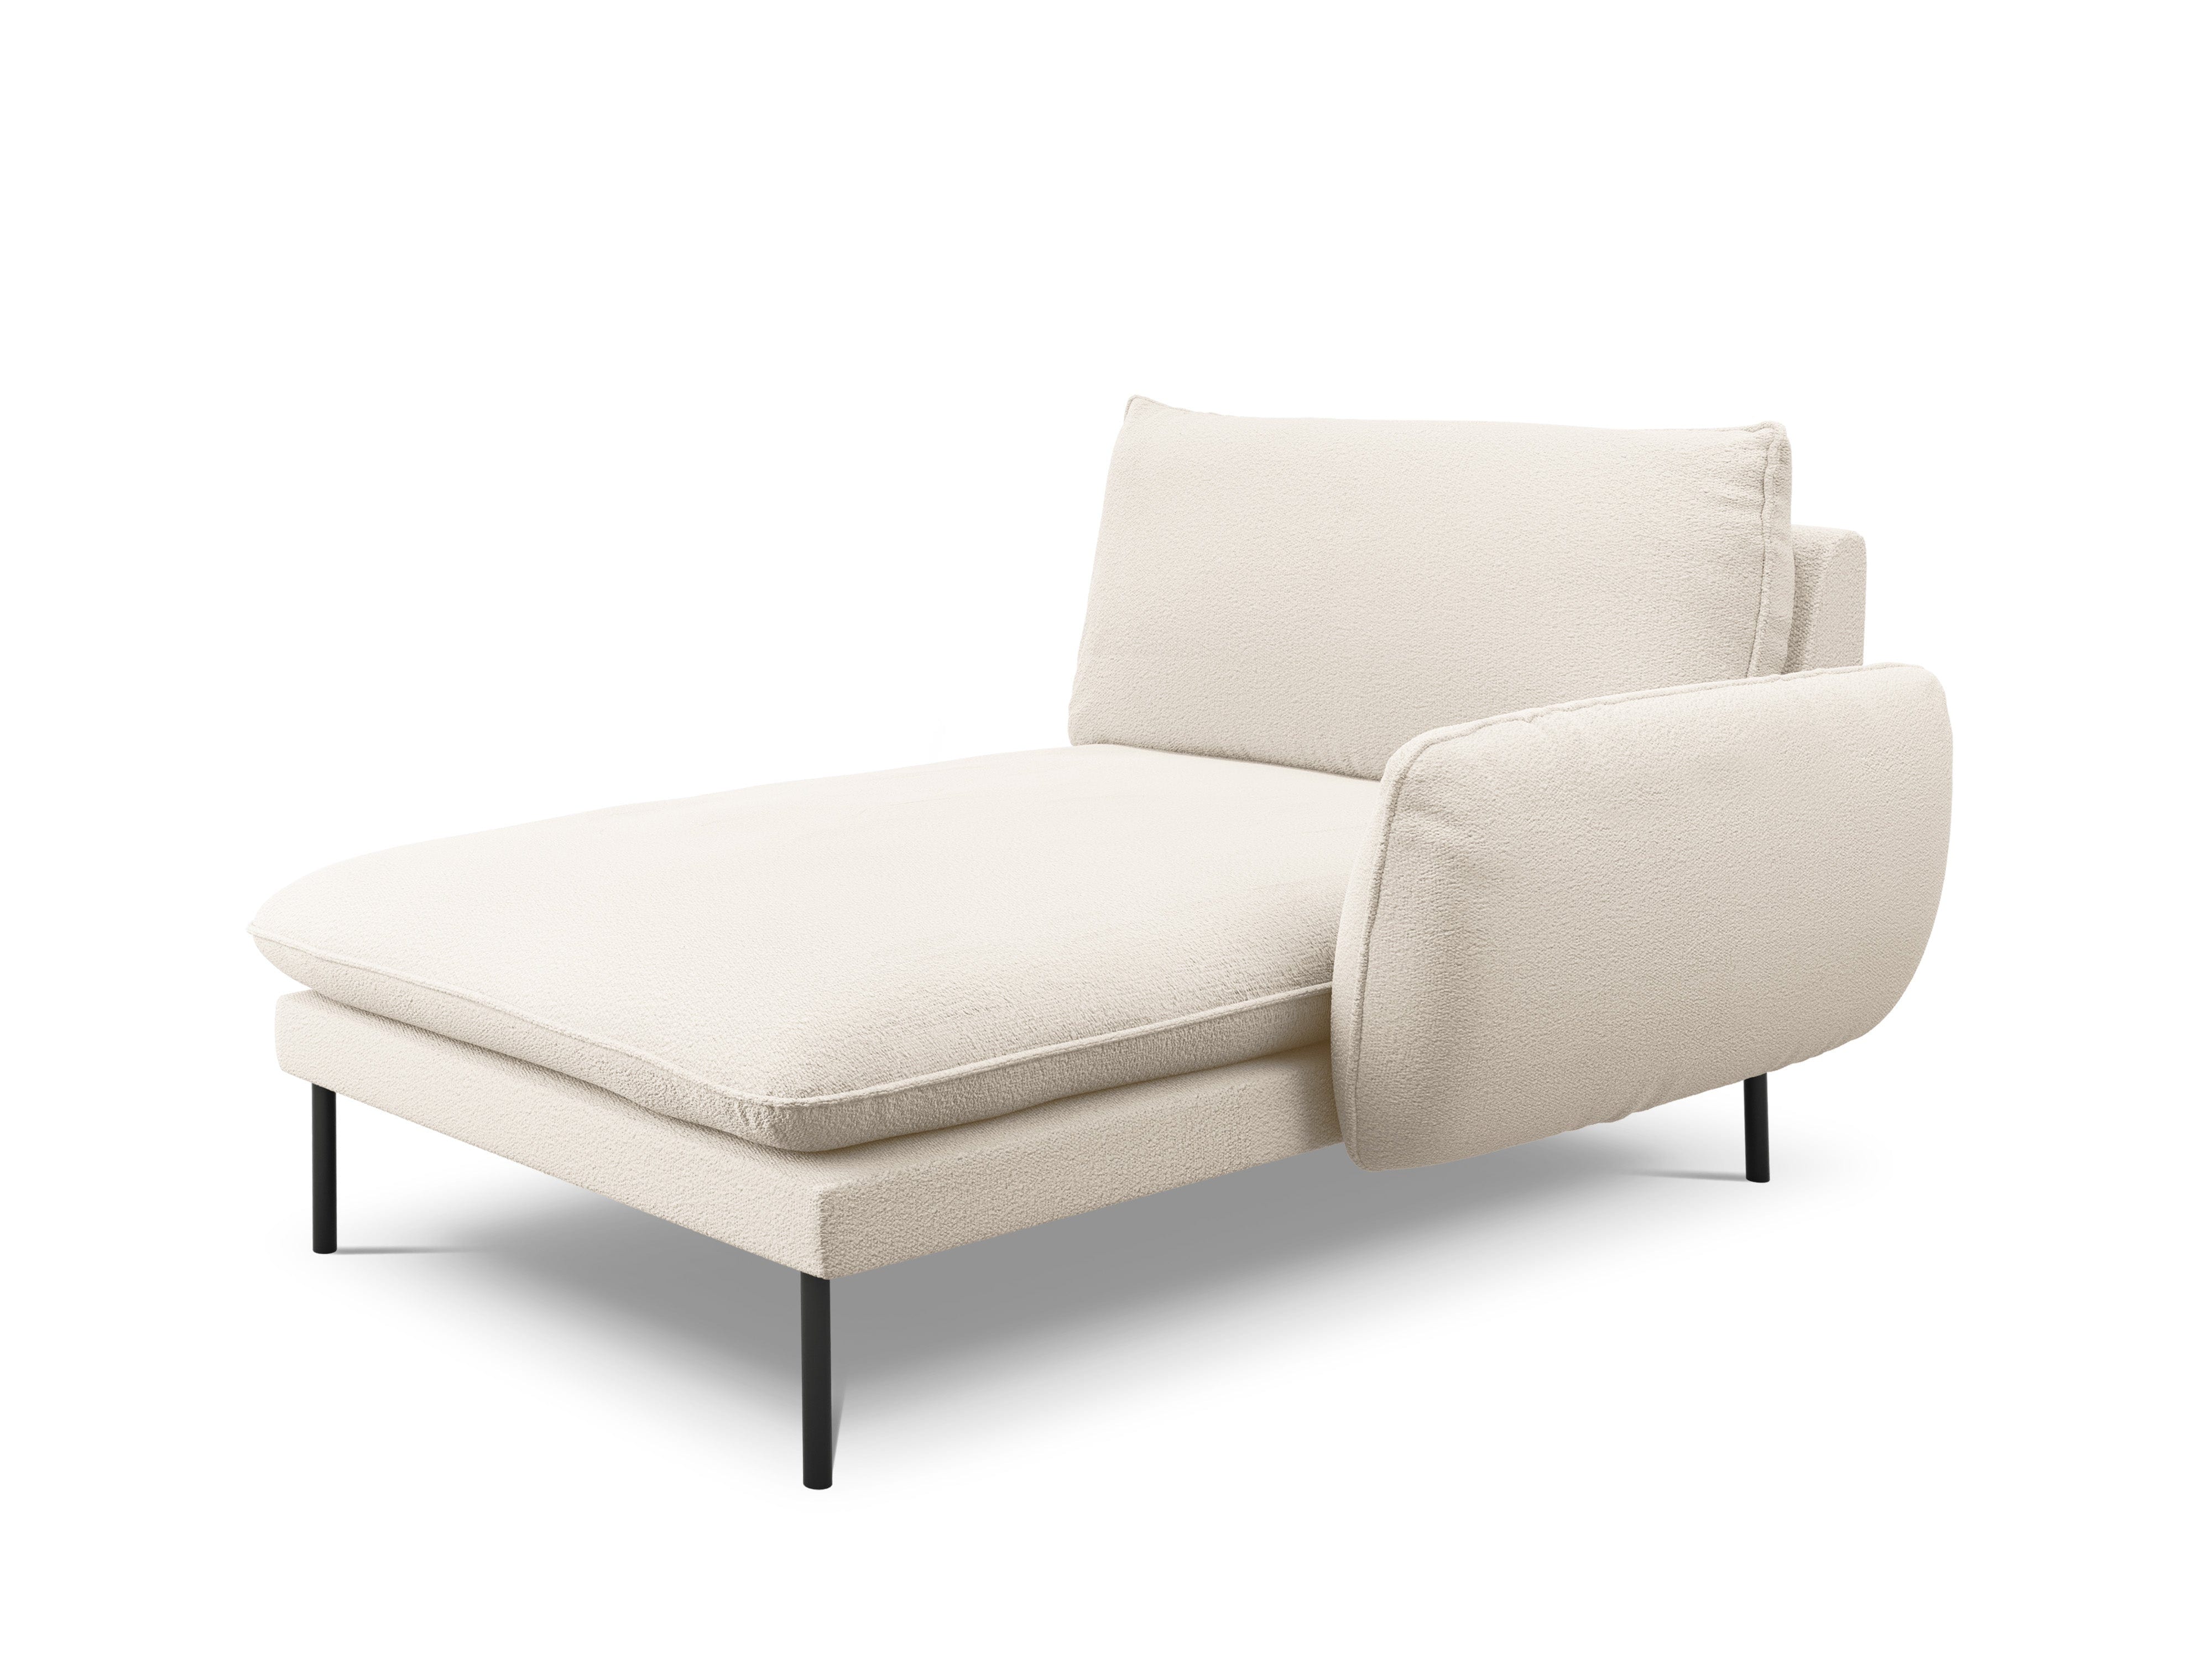 VIENNA chaise longue in boucle fabric right side beige with black base